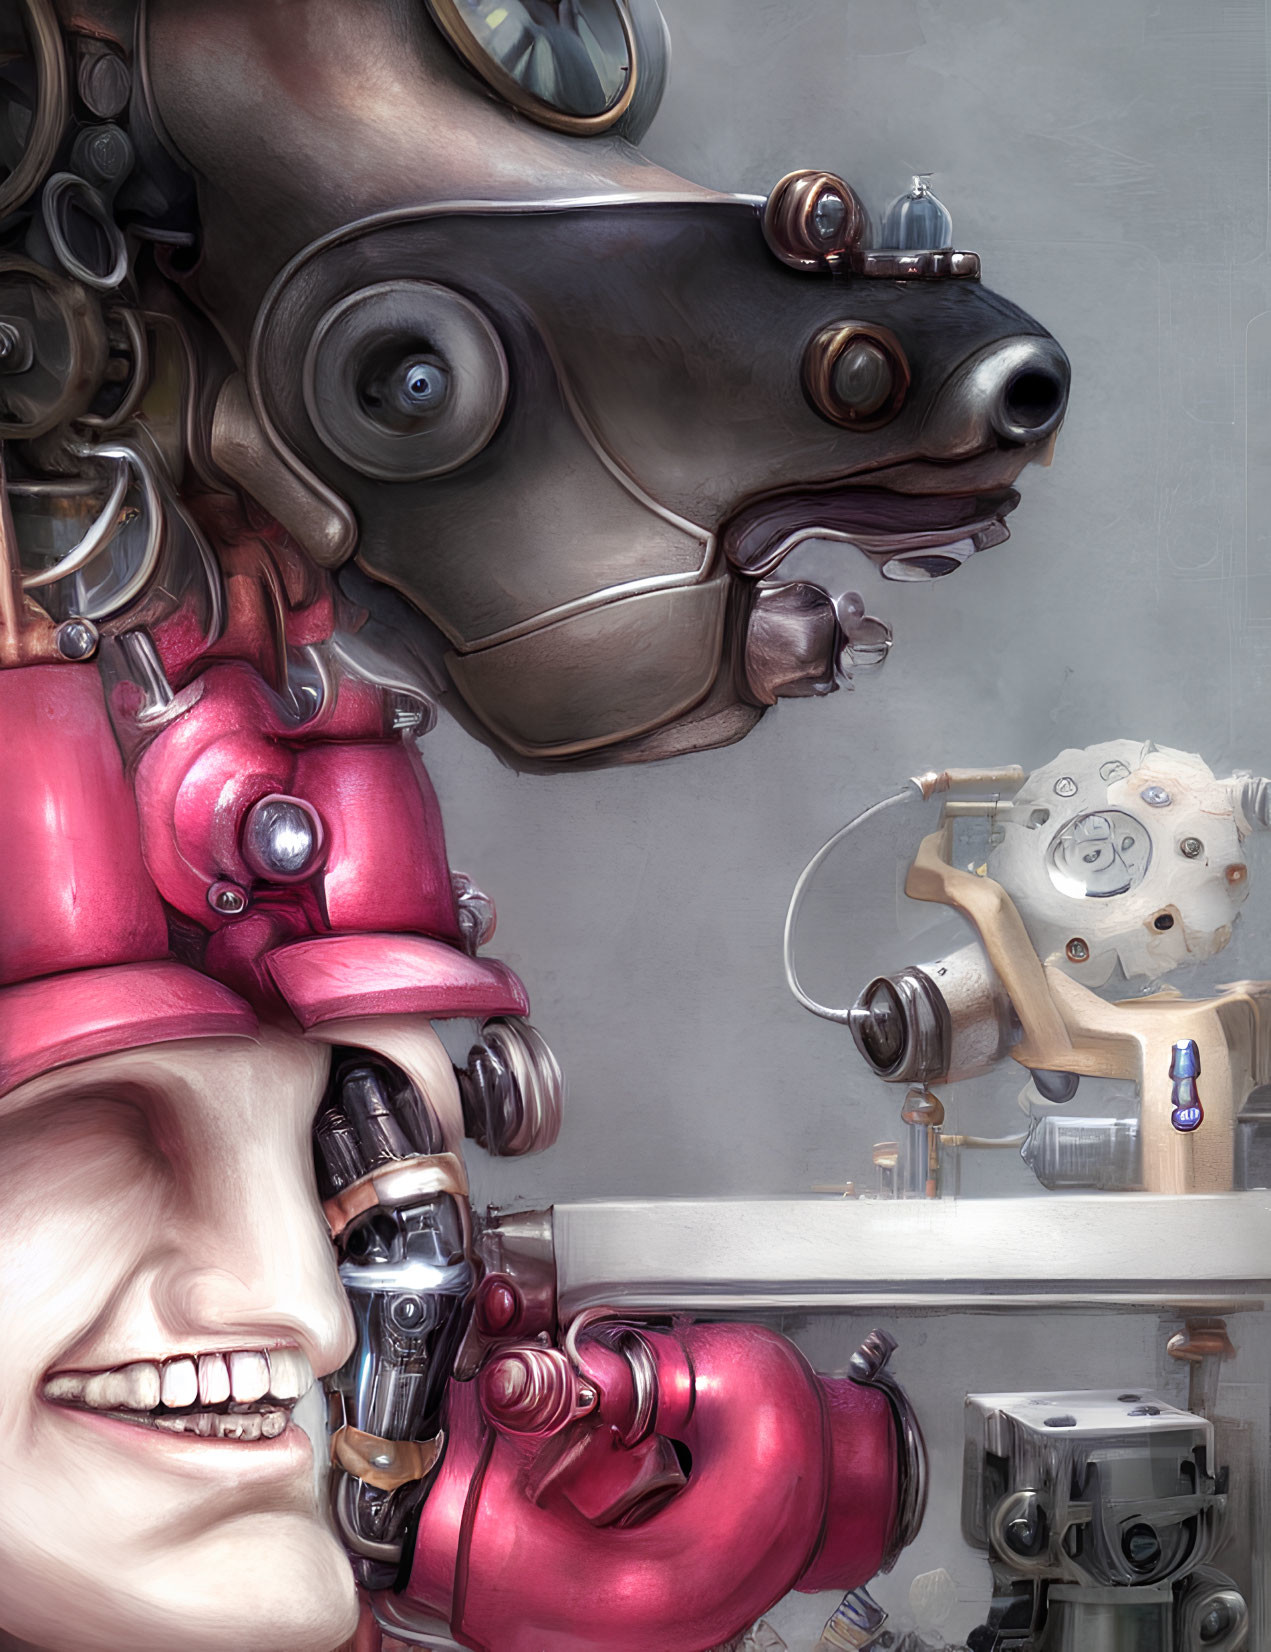 Surreal Artwork: Smiling Face with Mechanical Augmentations